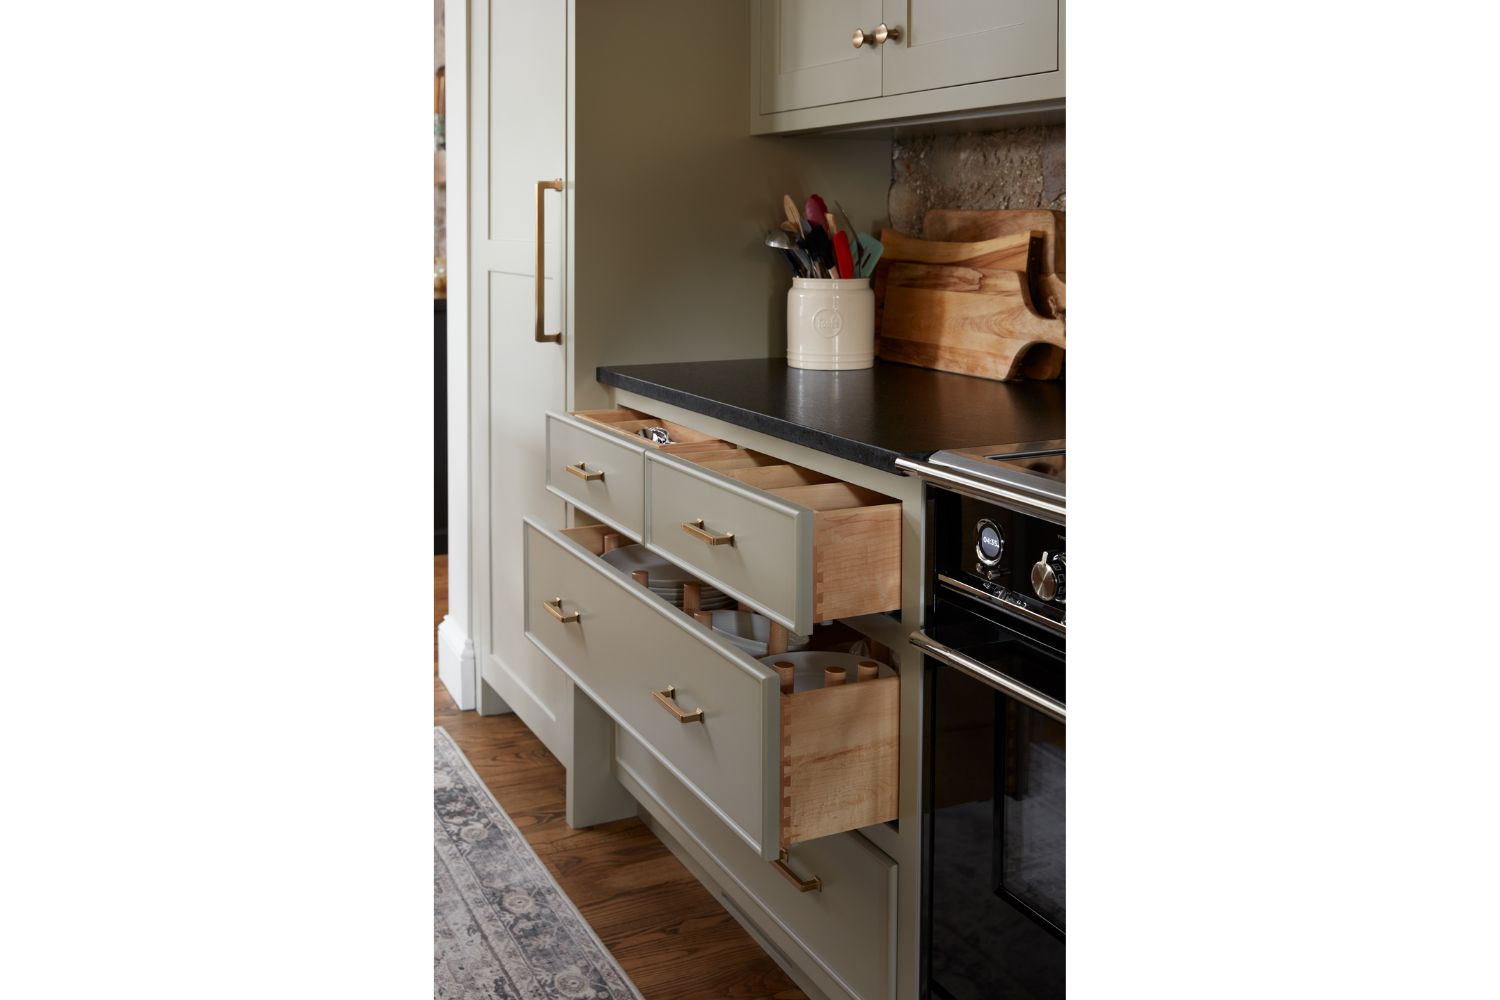 Gray kitchen cabinets with two open dovetail detailed drawers